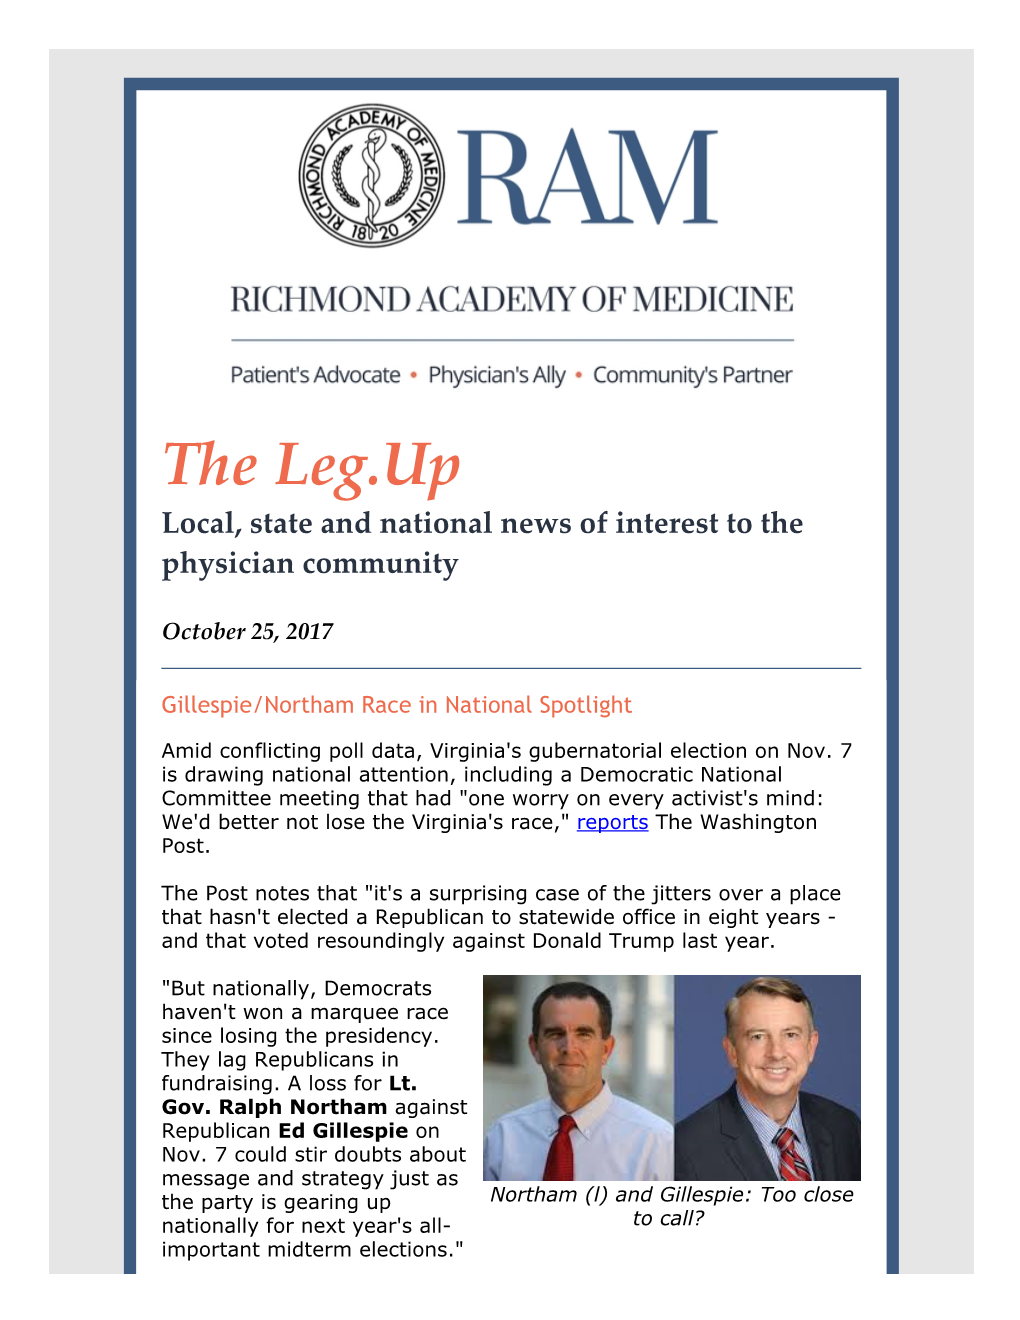 The Leg.Up Local, State and National News of Interest to the Physician Community